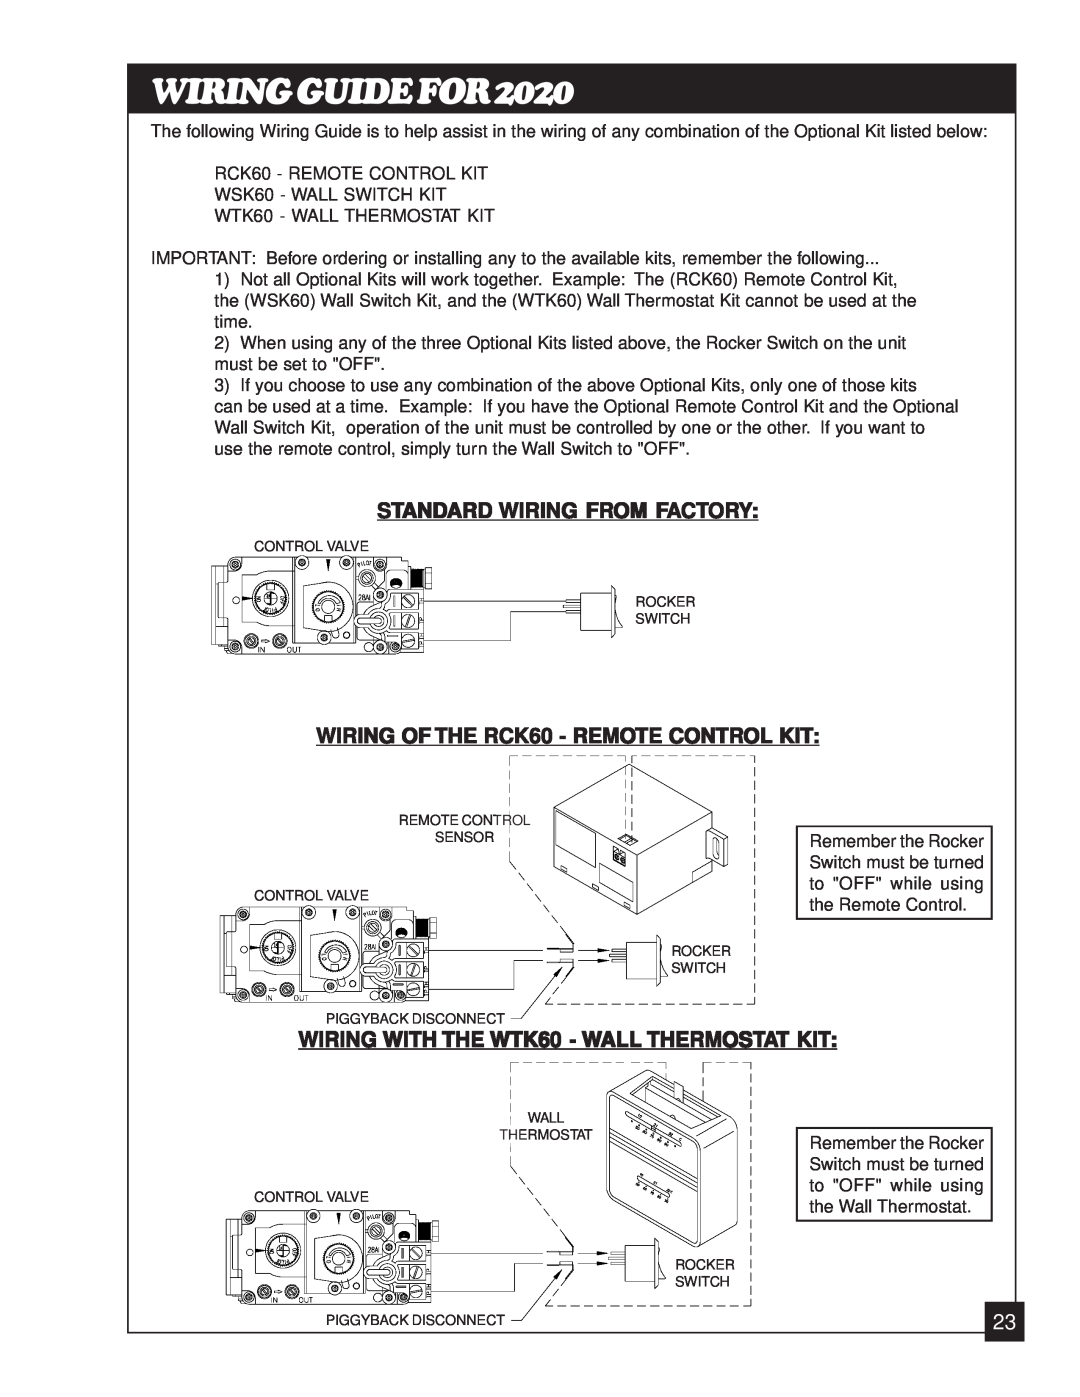 United States Stove 2020N manual Standard Wiring From Factory, WIRING OF THE RCK60 - REMOTE CONTROL KIT, WIRINGGUIDEFOR2020 